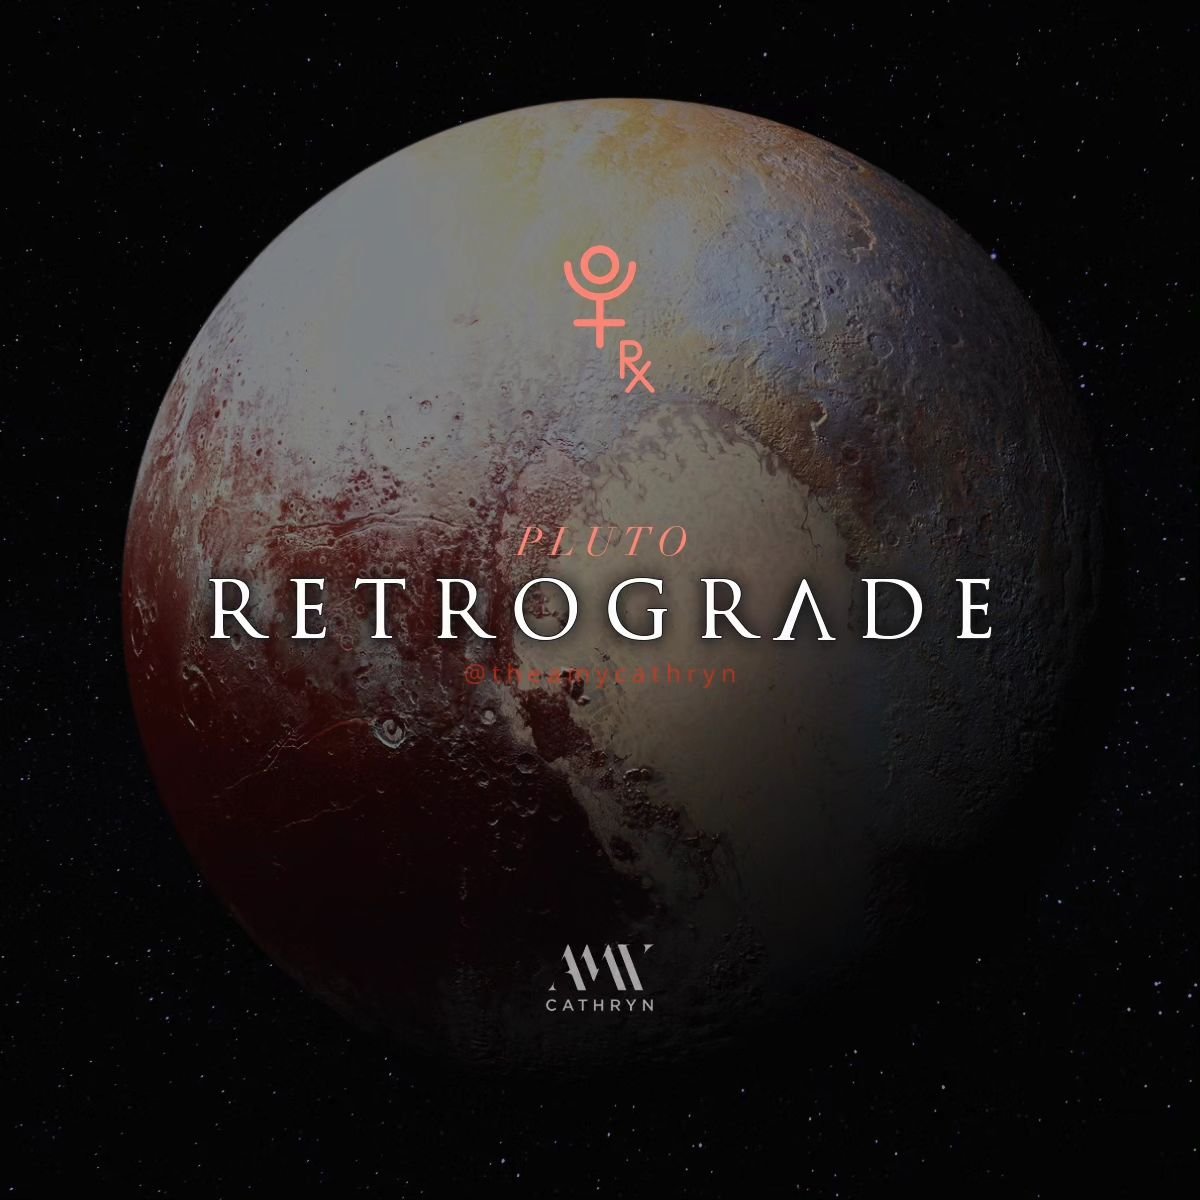 Pluto stationed retrograde today, but no need to panic. Pluto retrogrades are common &amp; happen about 40% of the time. They represent reassessing where we are being too controlling or allowing others to control us. 

Pluto retrograde is also a time